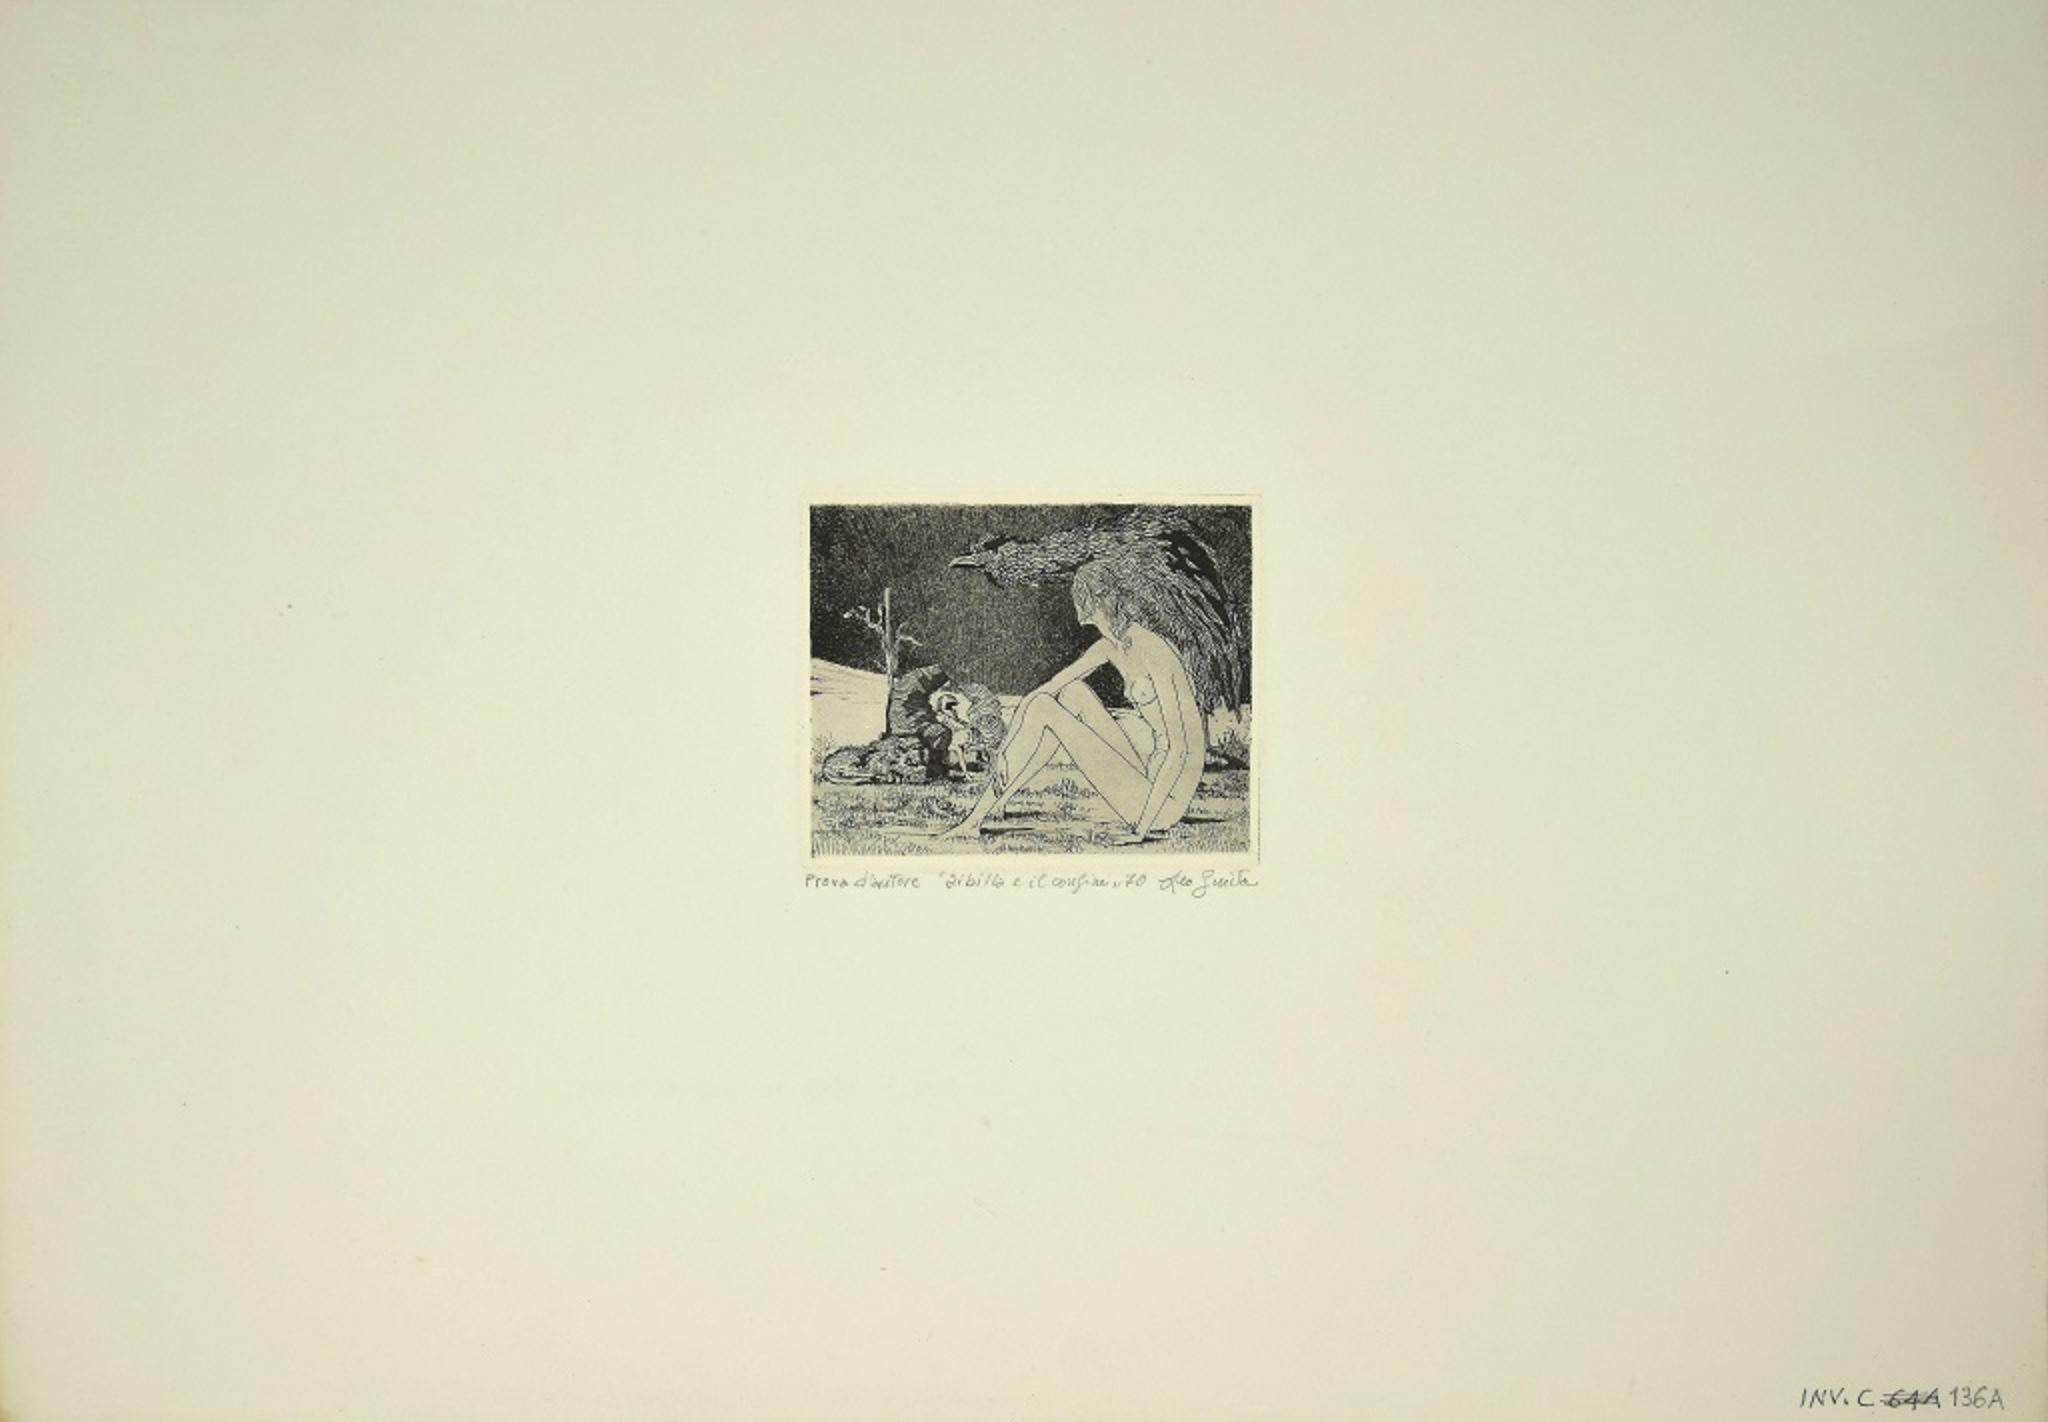 The Sibyl and the Border is an original Contemporary artwork realized in 1970 by the italian artist Leo Guida.

Original B/W Etching on Fabriano Paper. Image Dimensions: 12.5 x 15.5 cm

Dated, Titled and Hand-signed in pencil on the lower margin: